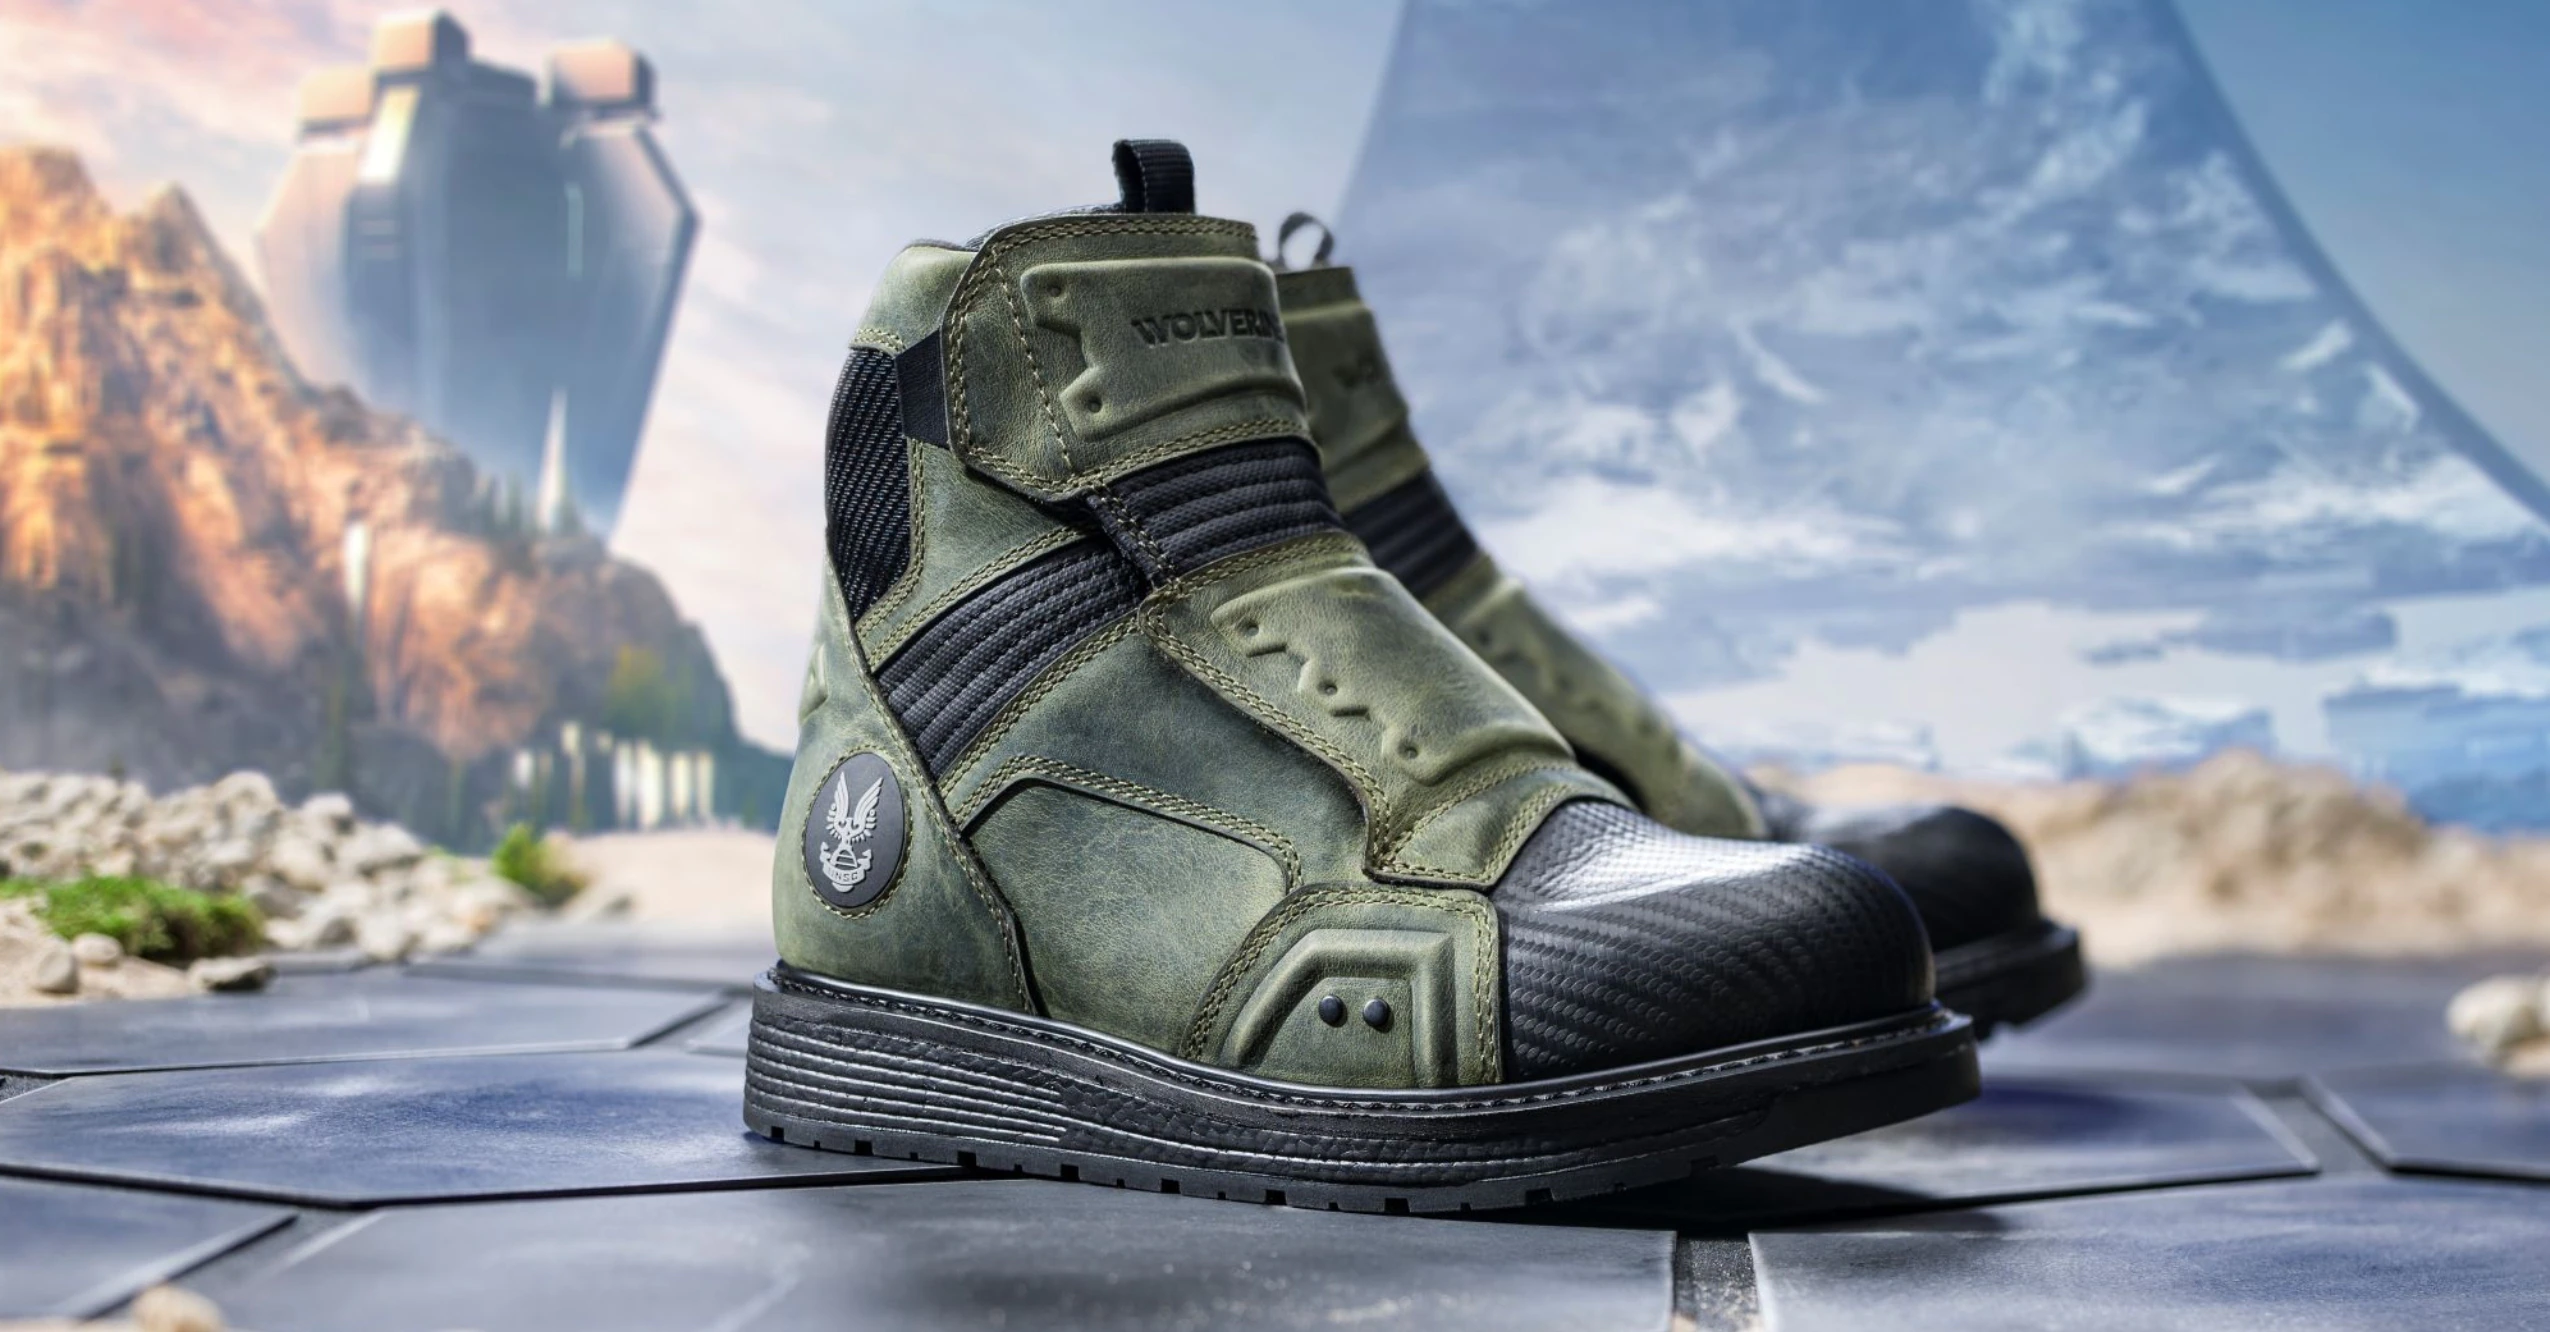 Wolverine’s Master Chief Boots Let You Step Into ‘Halo’ Fighter’s Shoes